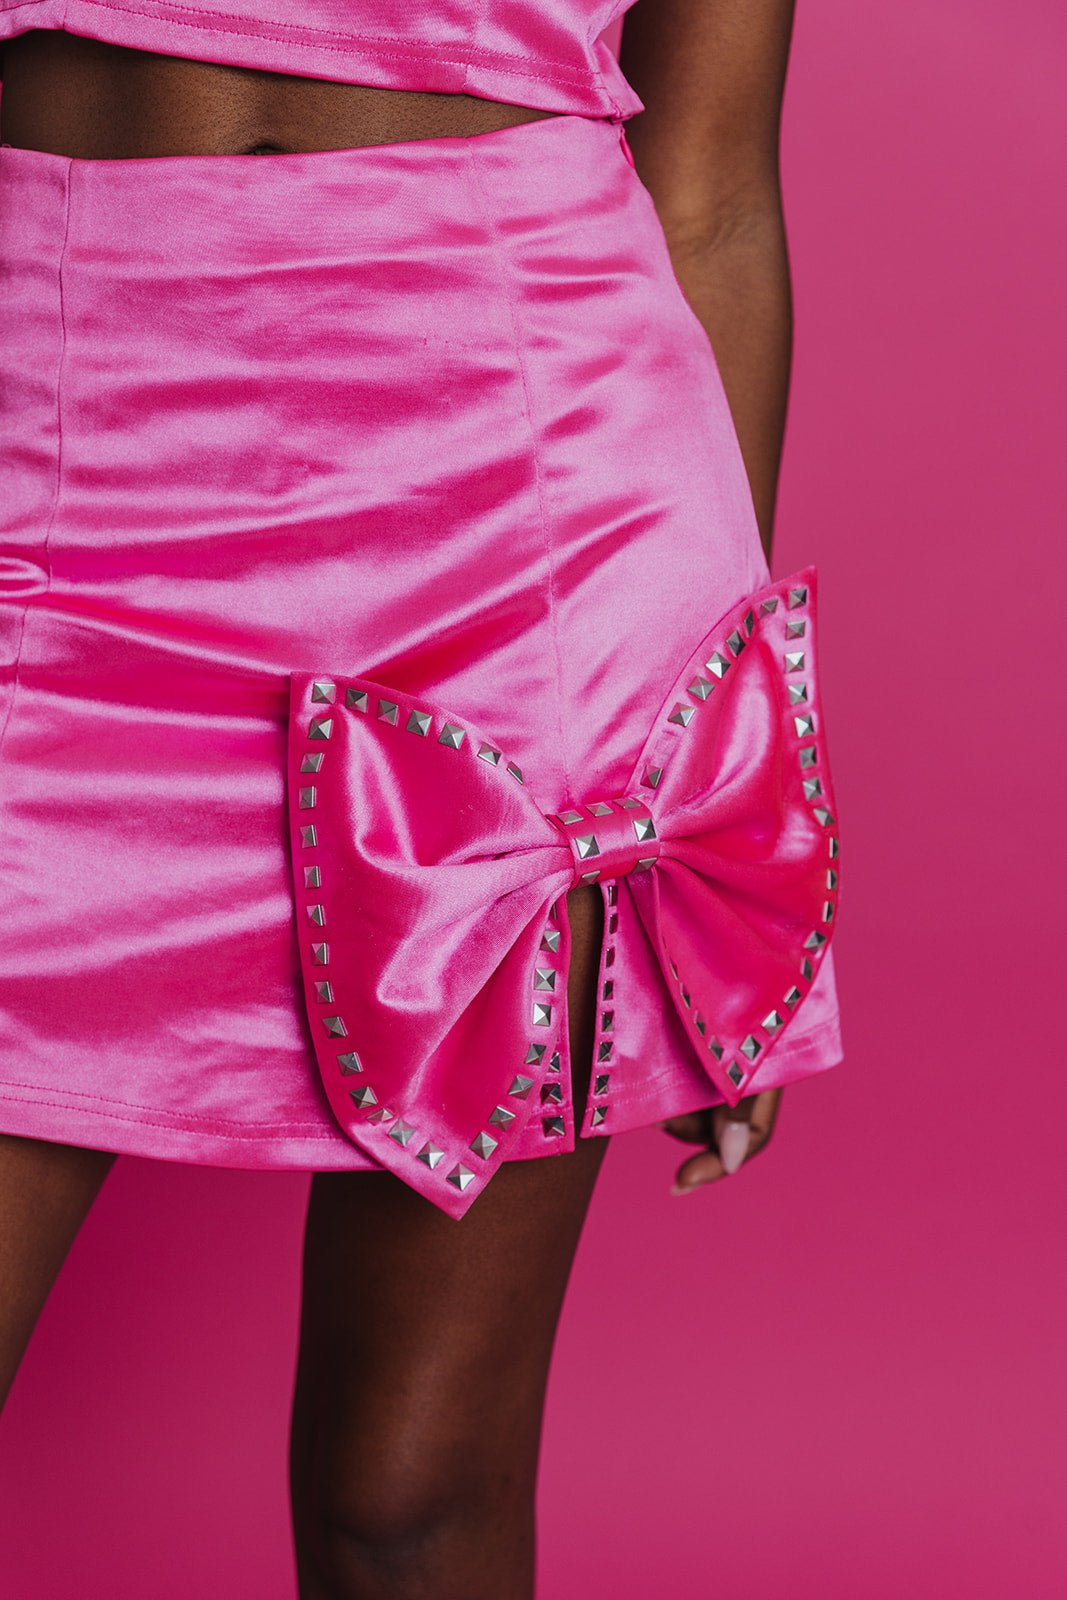 'She’s Giving Barbie' Adaptive Skirt - Lady Fines